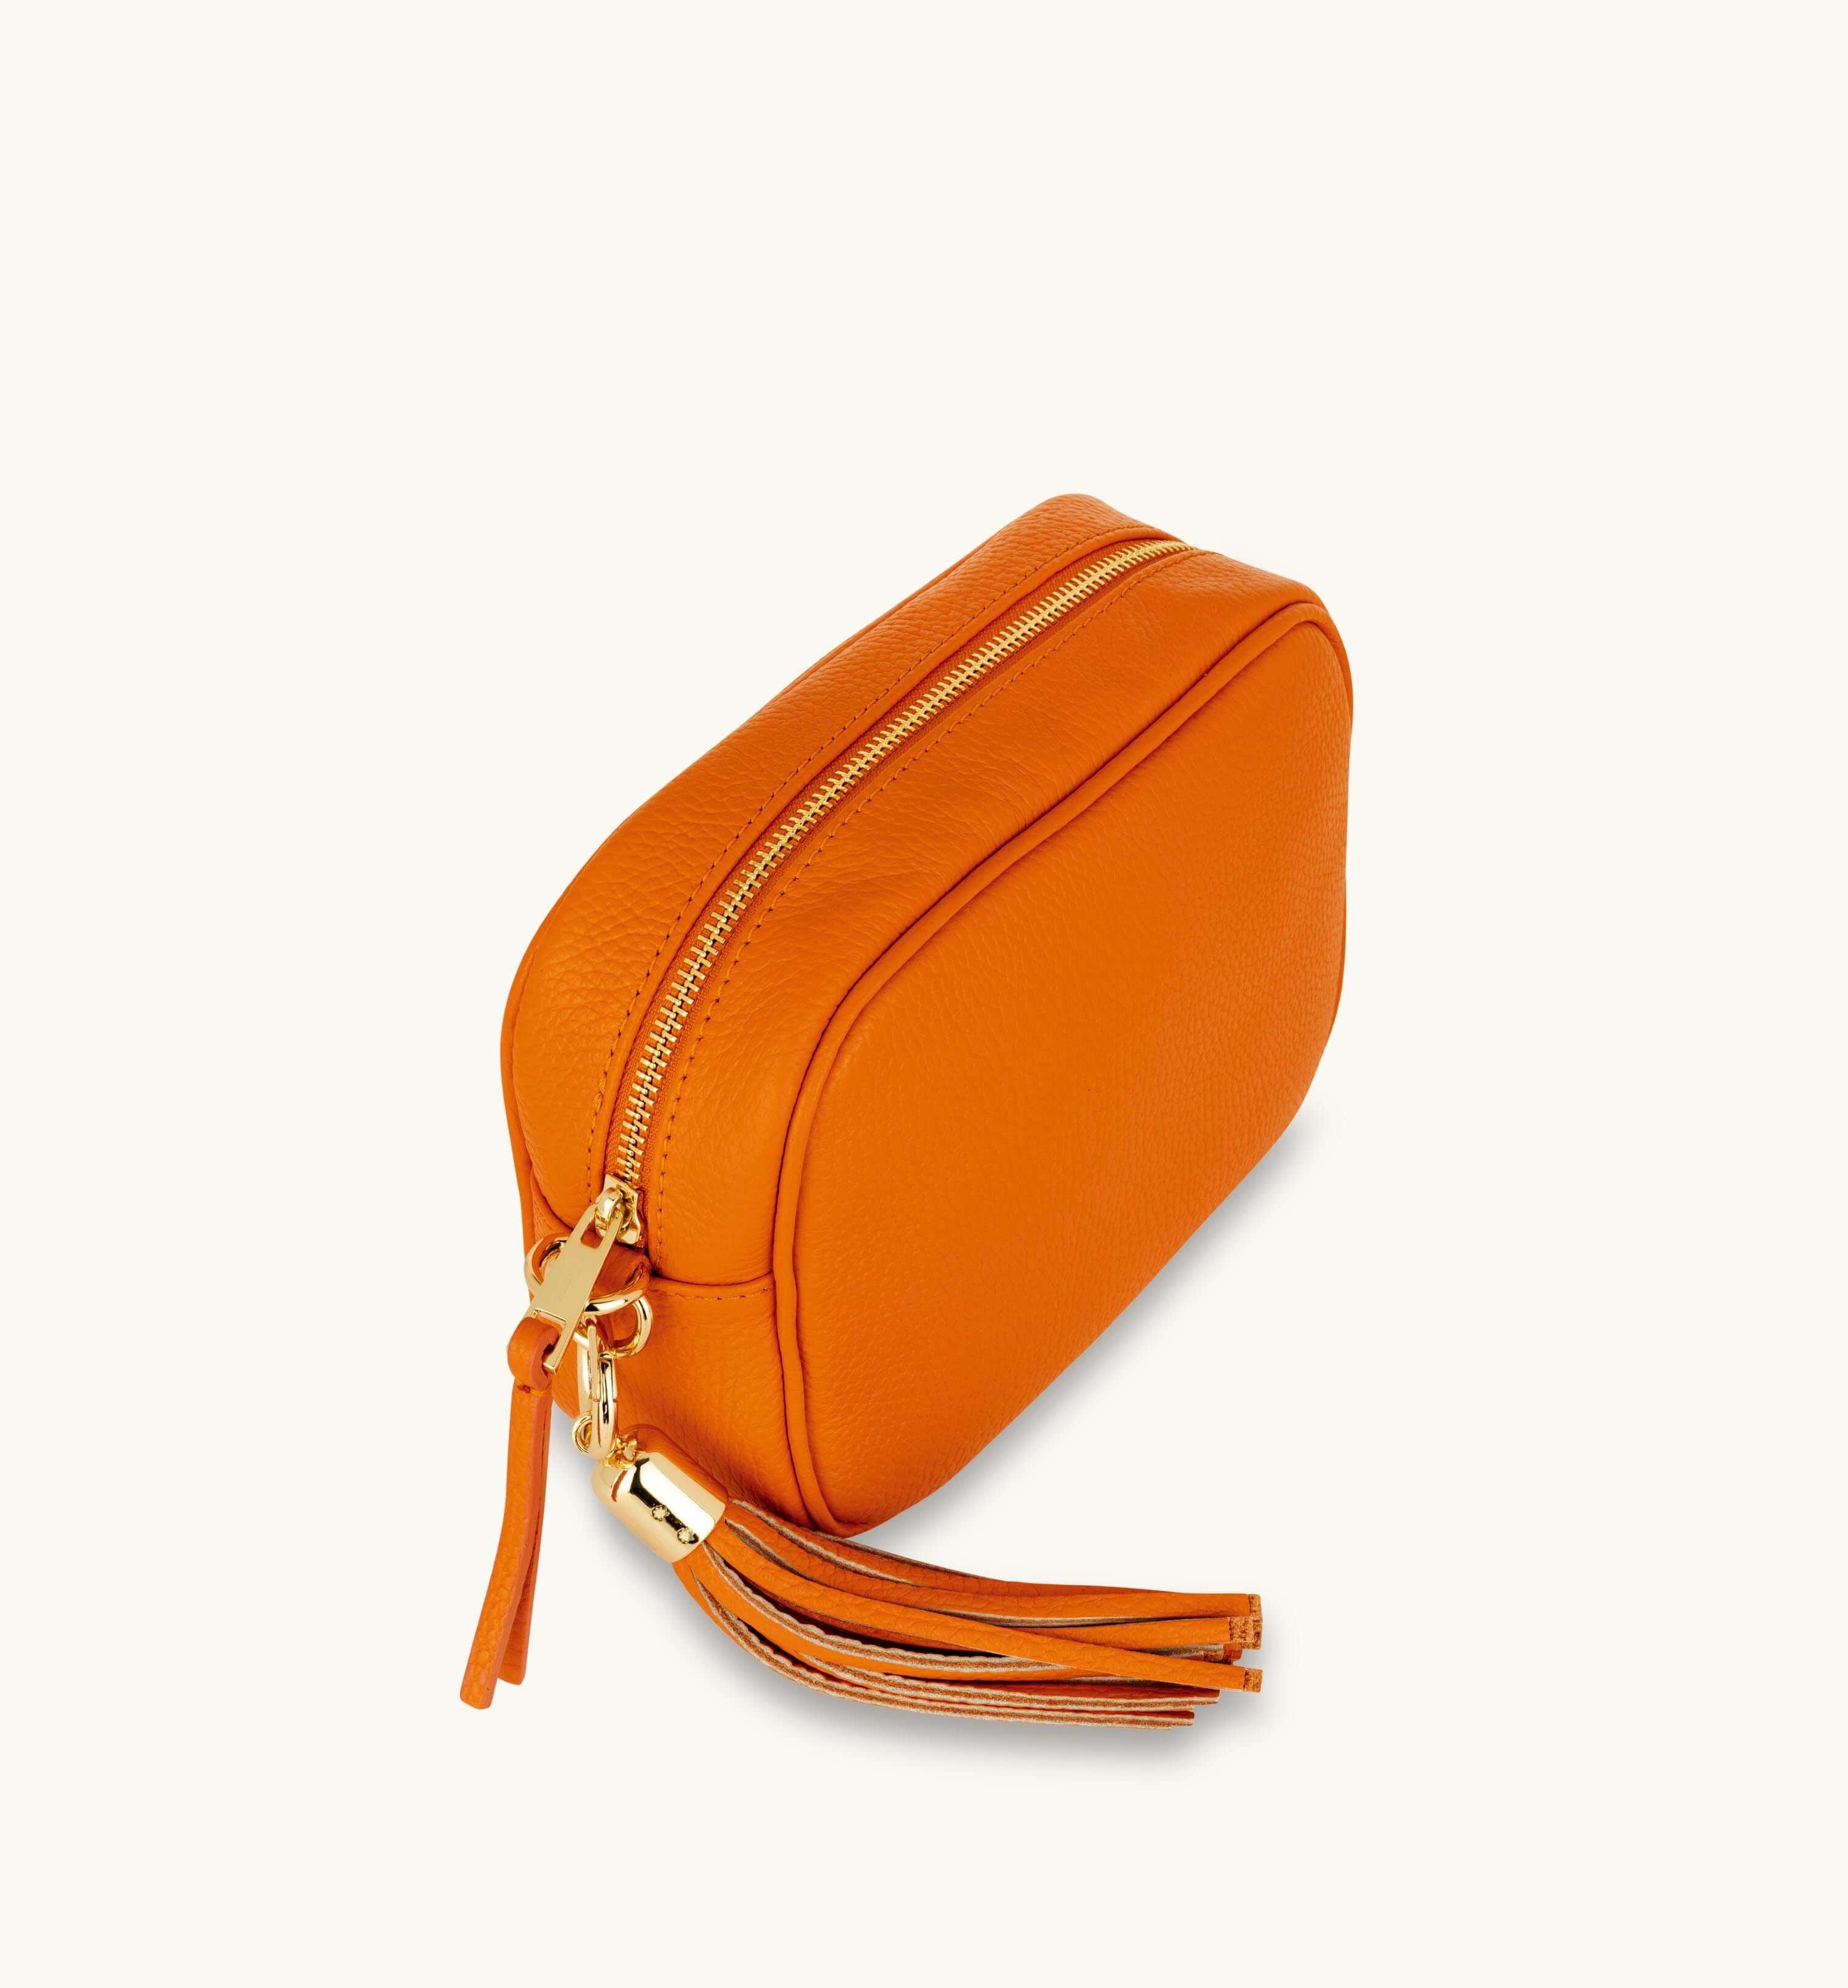 ELECTRIC ORANGE CROSSBODY BAG WITH GOLD CHAIN